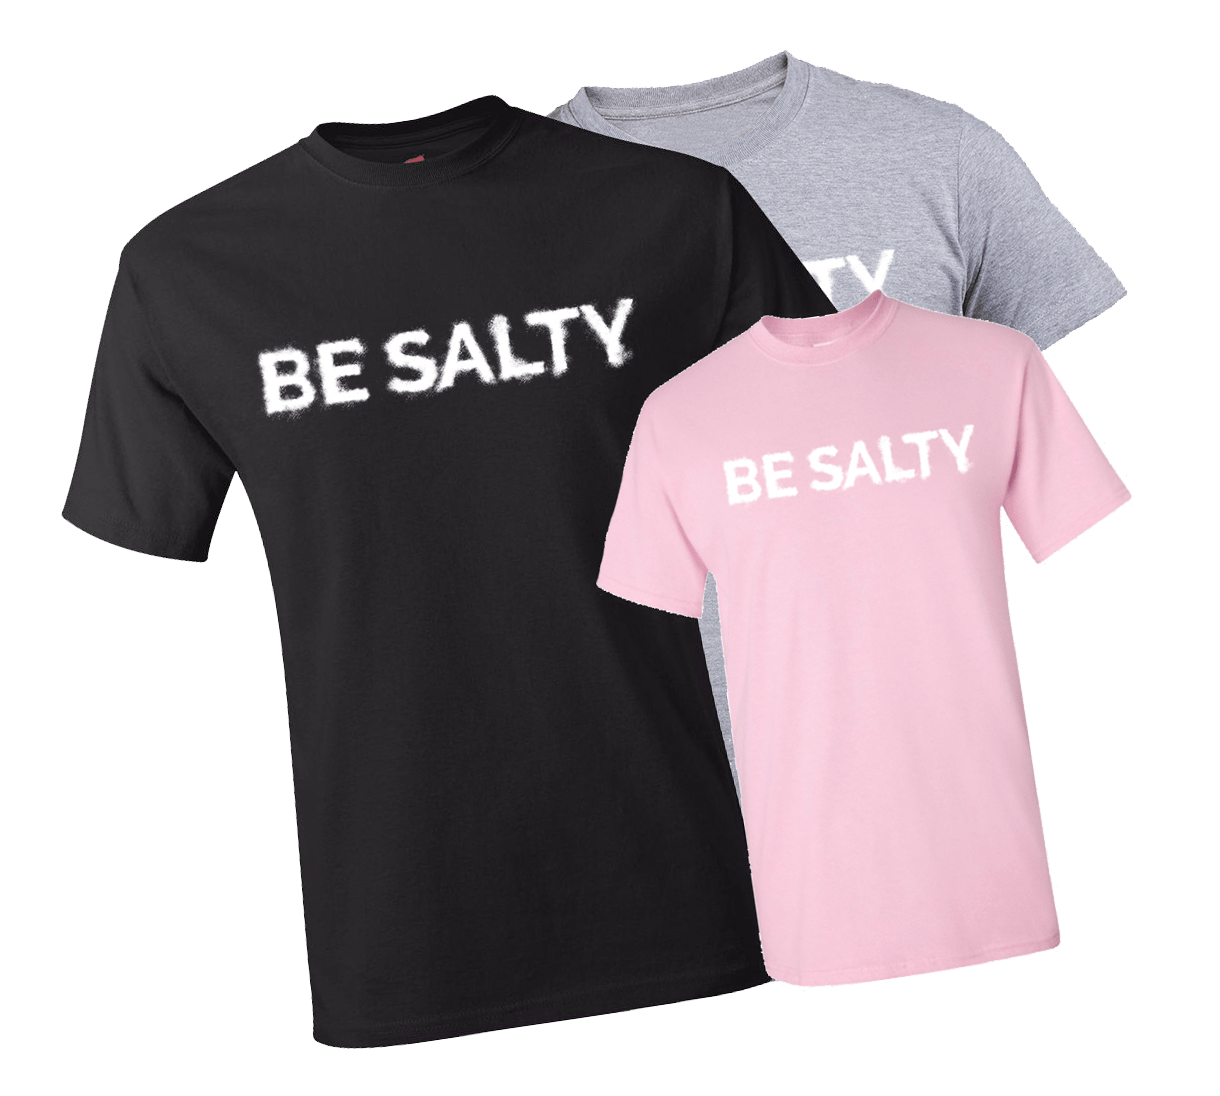 Be Salty Event Attendees